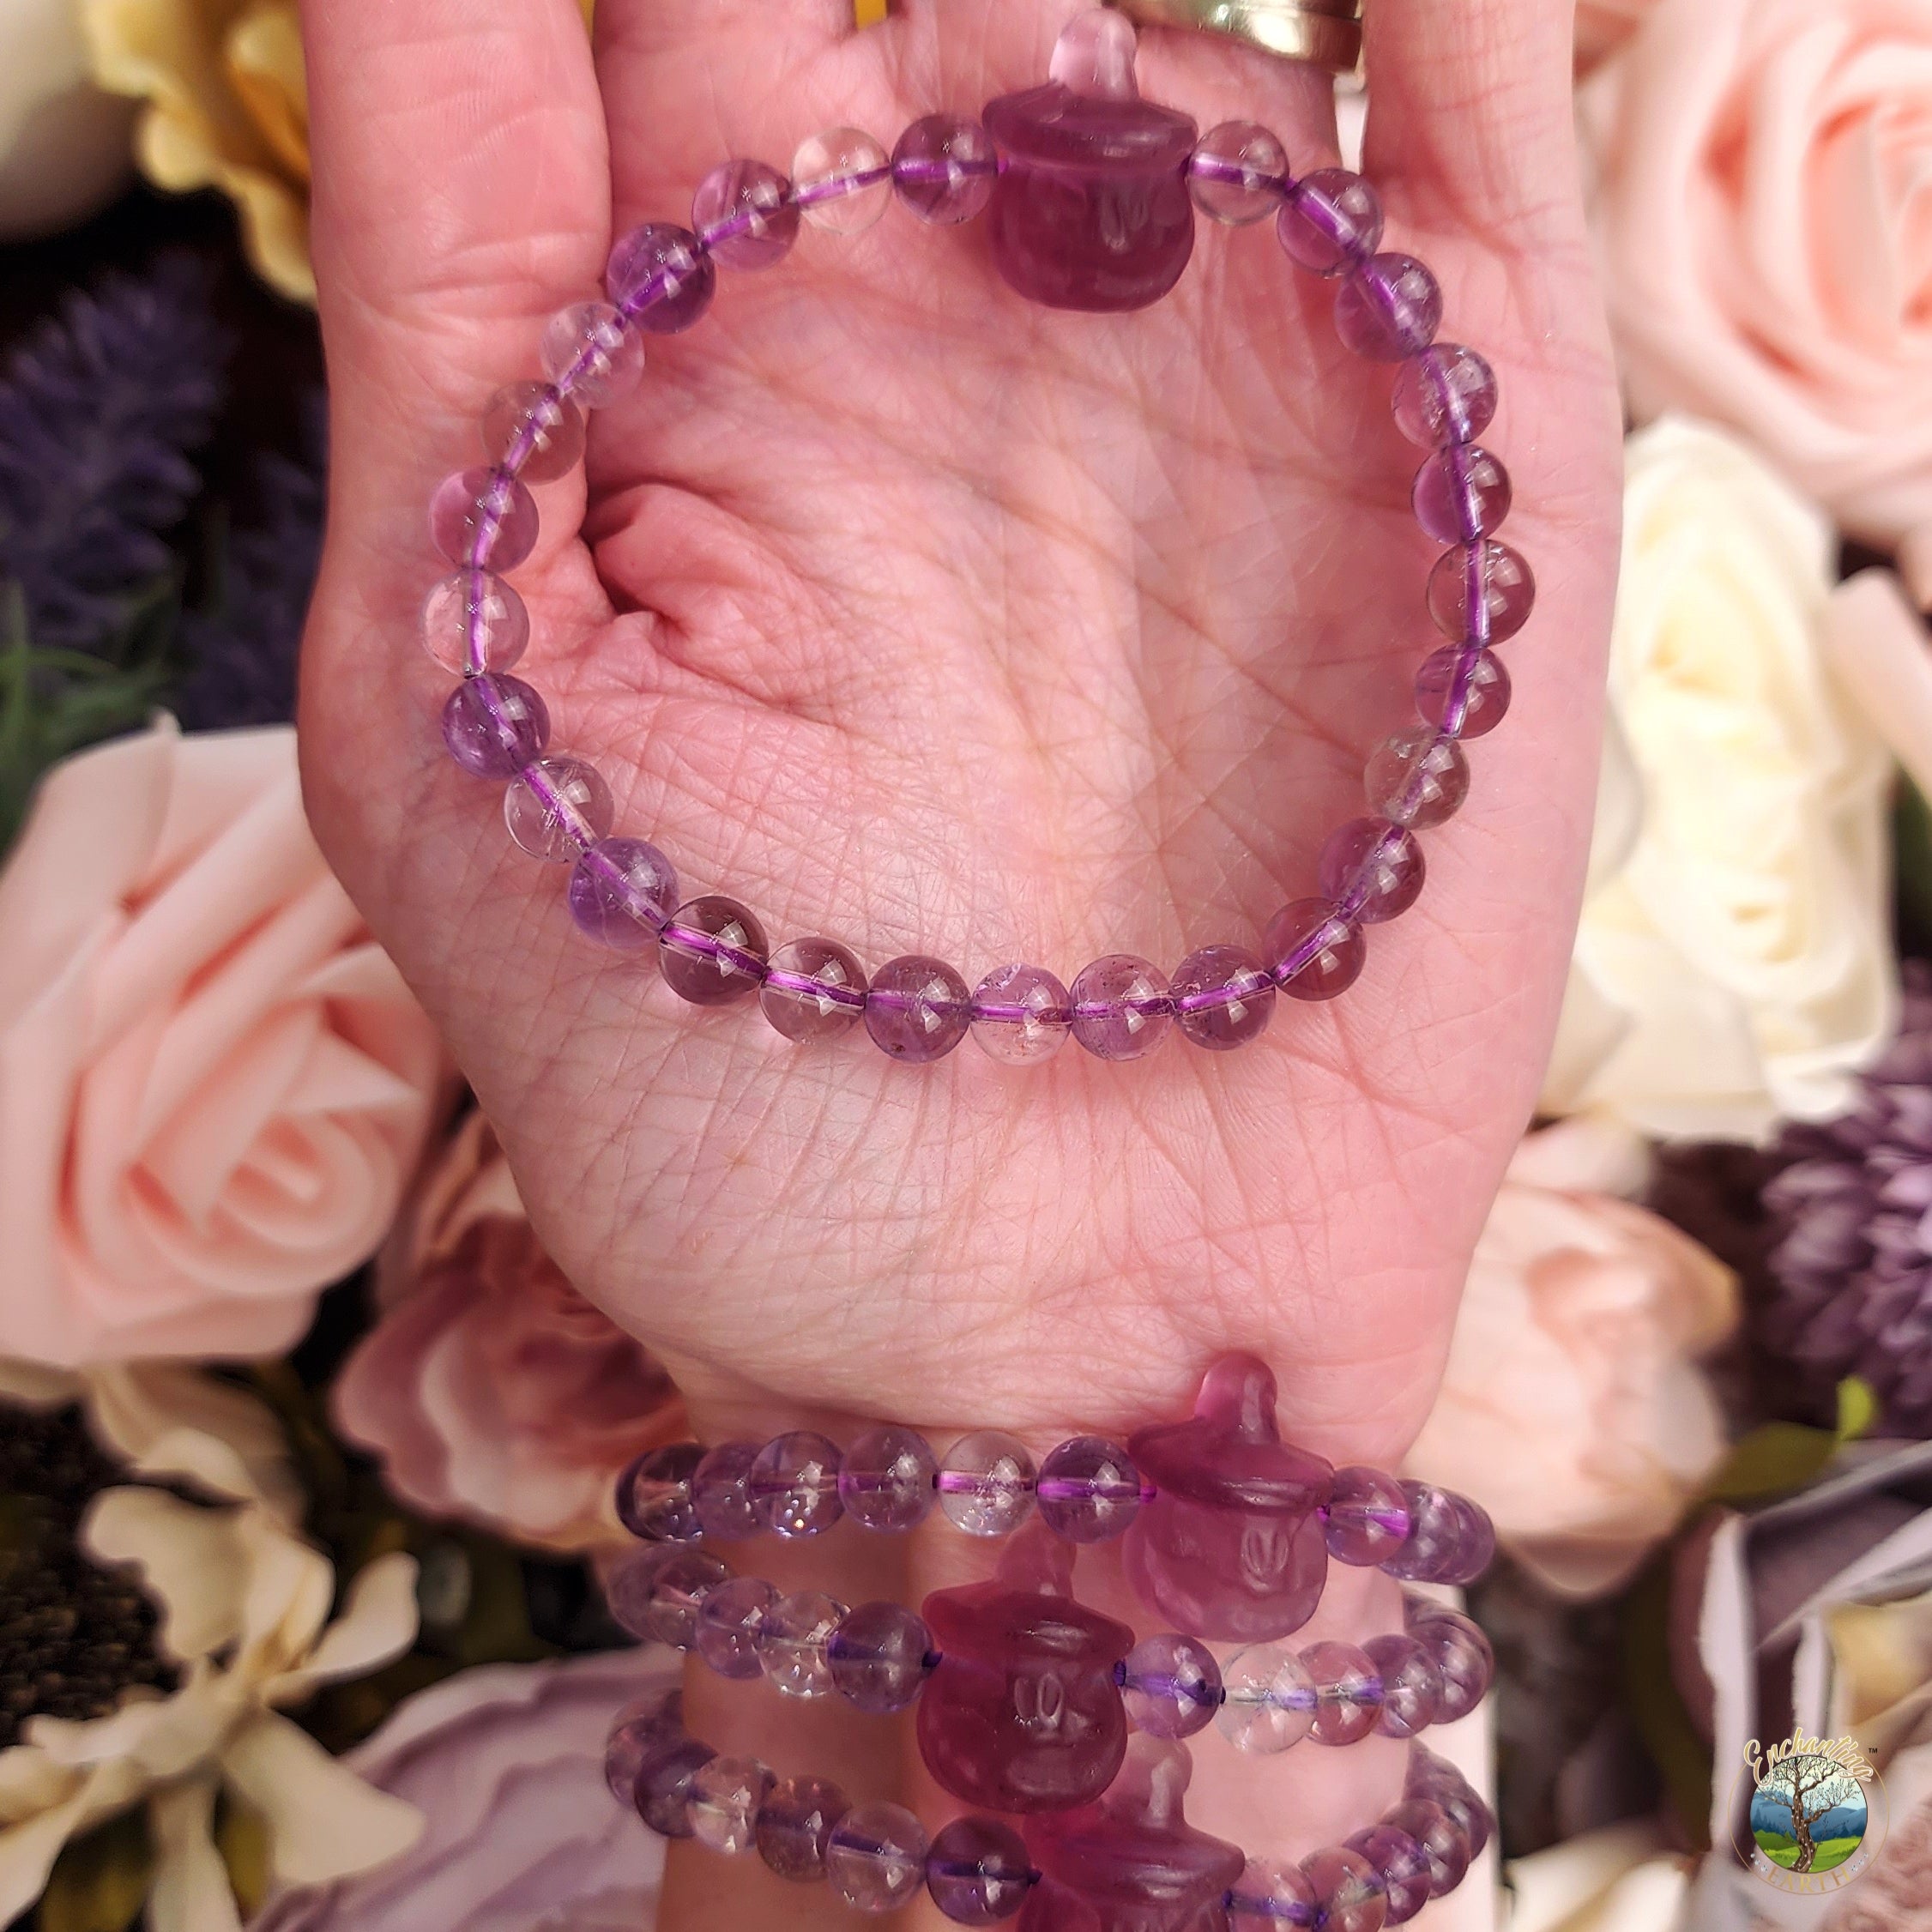 Fluorite Pumpkin with Amethyst Bracelet for Focus and Intuition